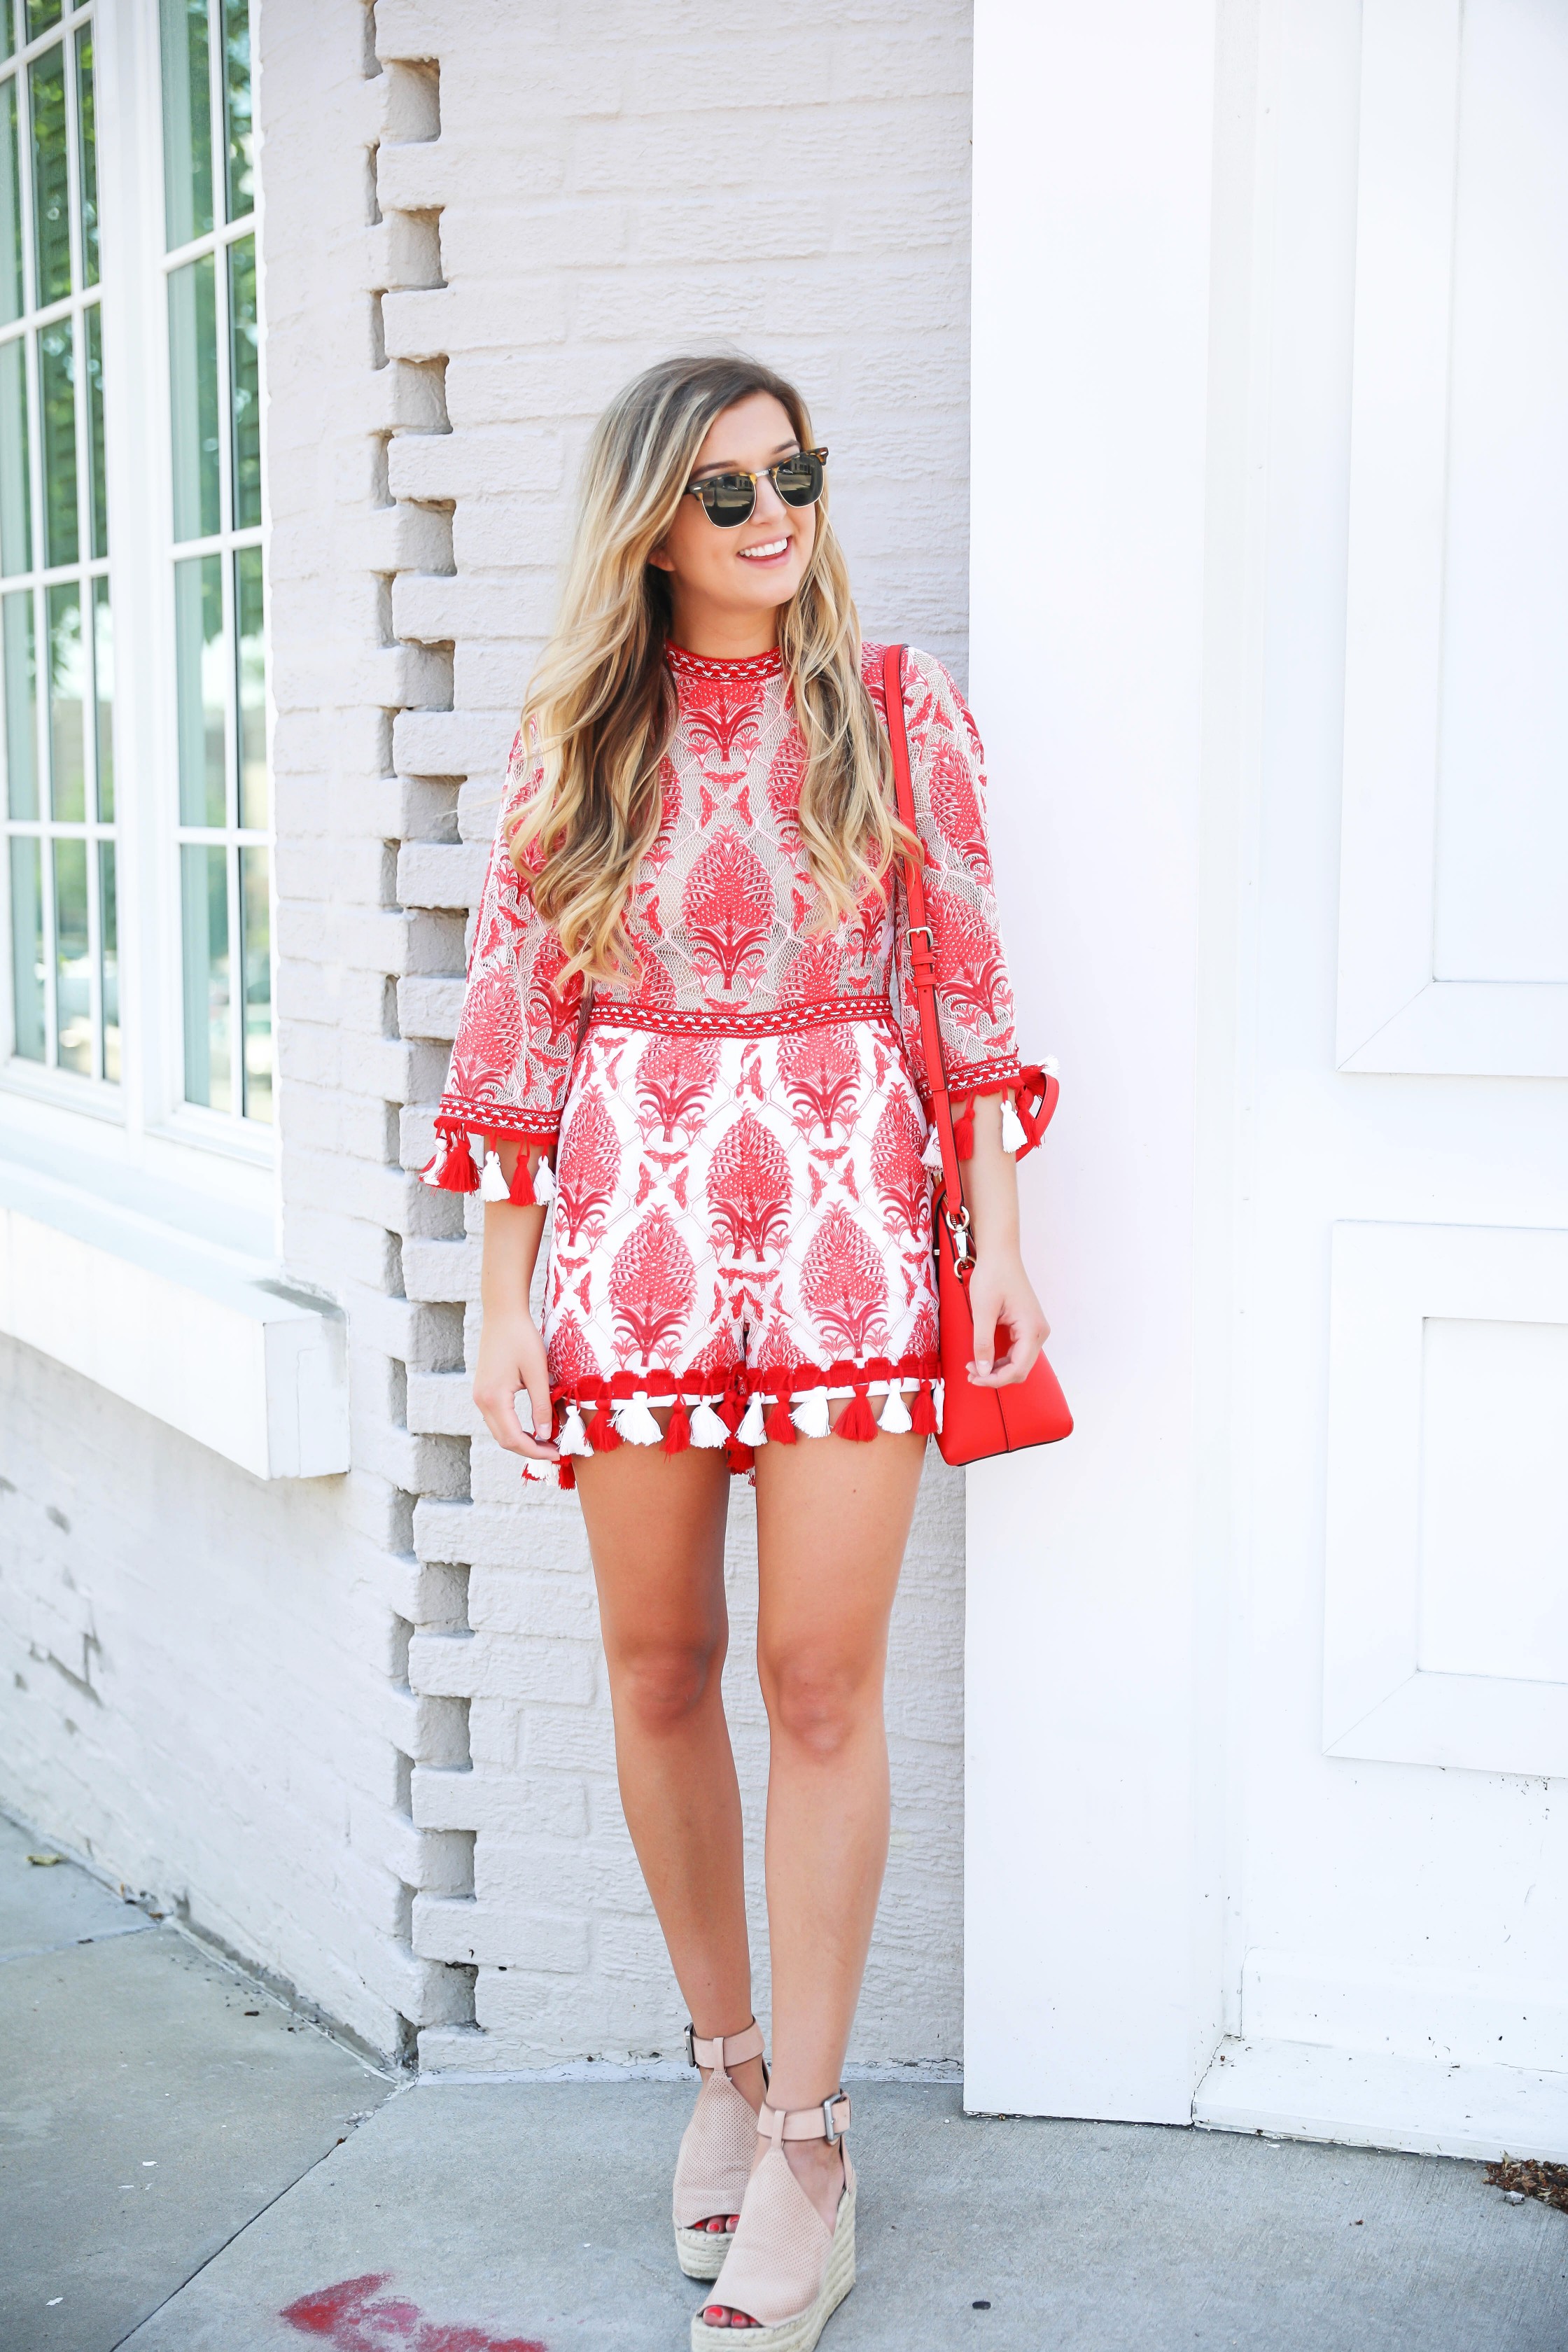 Red and white tassel lace romper from ebay! This is the perfect summer romper, I love the tassels around the sleeves and legs! How cute would this be on the beach? Kate spade red purse styled with this romper! Details on kansas city fashion blog daily dose of charm by lauren lindmark